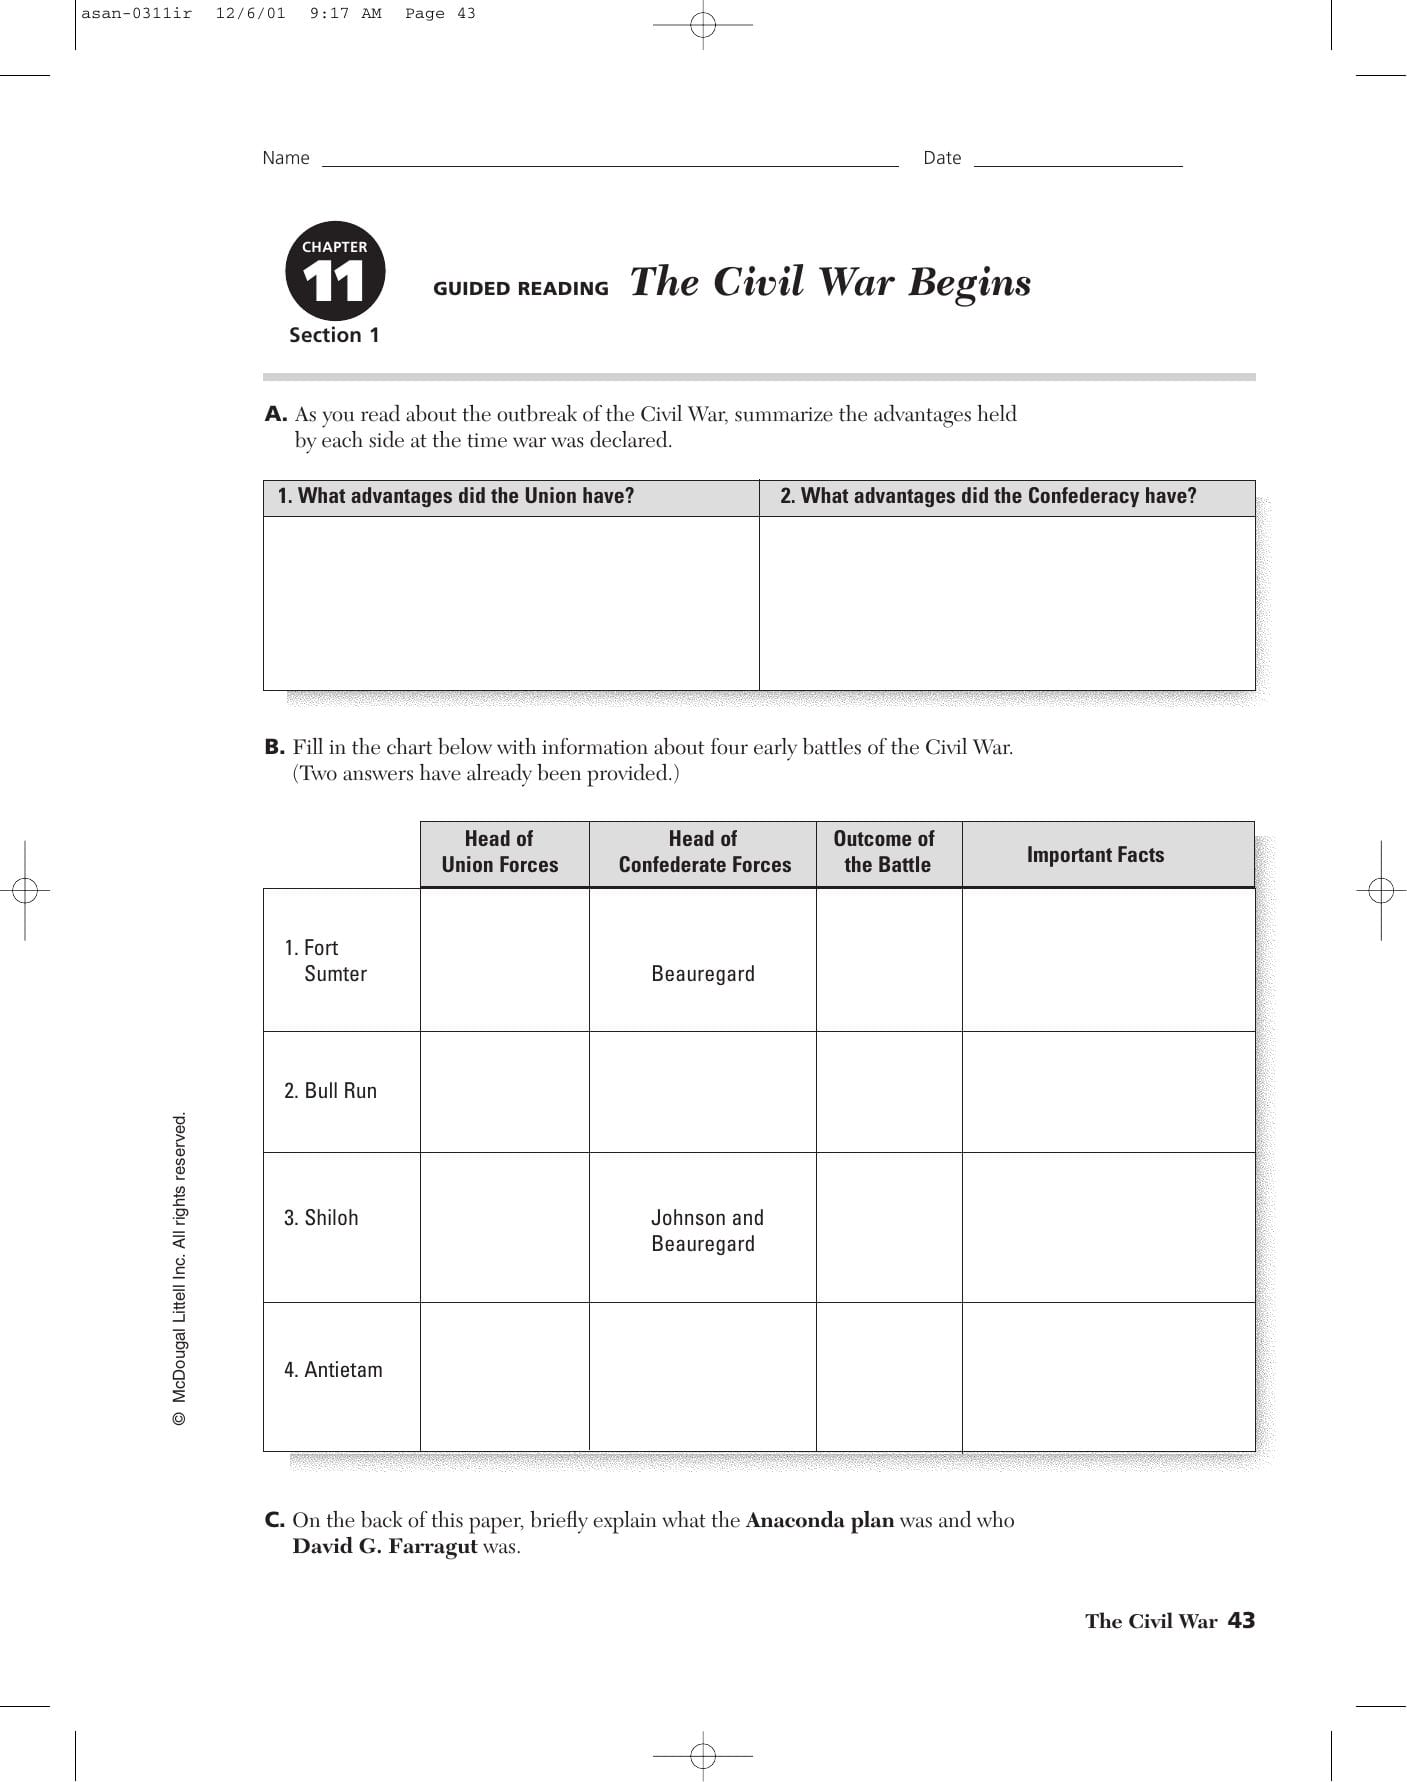 Chapter 11 Guided Reading The Civil War Begins As Well As Chapter 11 Section 1 World War 1 Begins Worksheet Answers